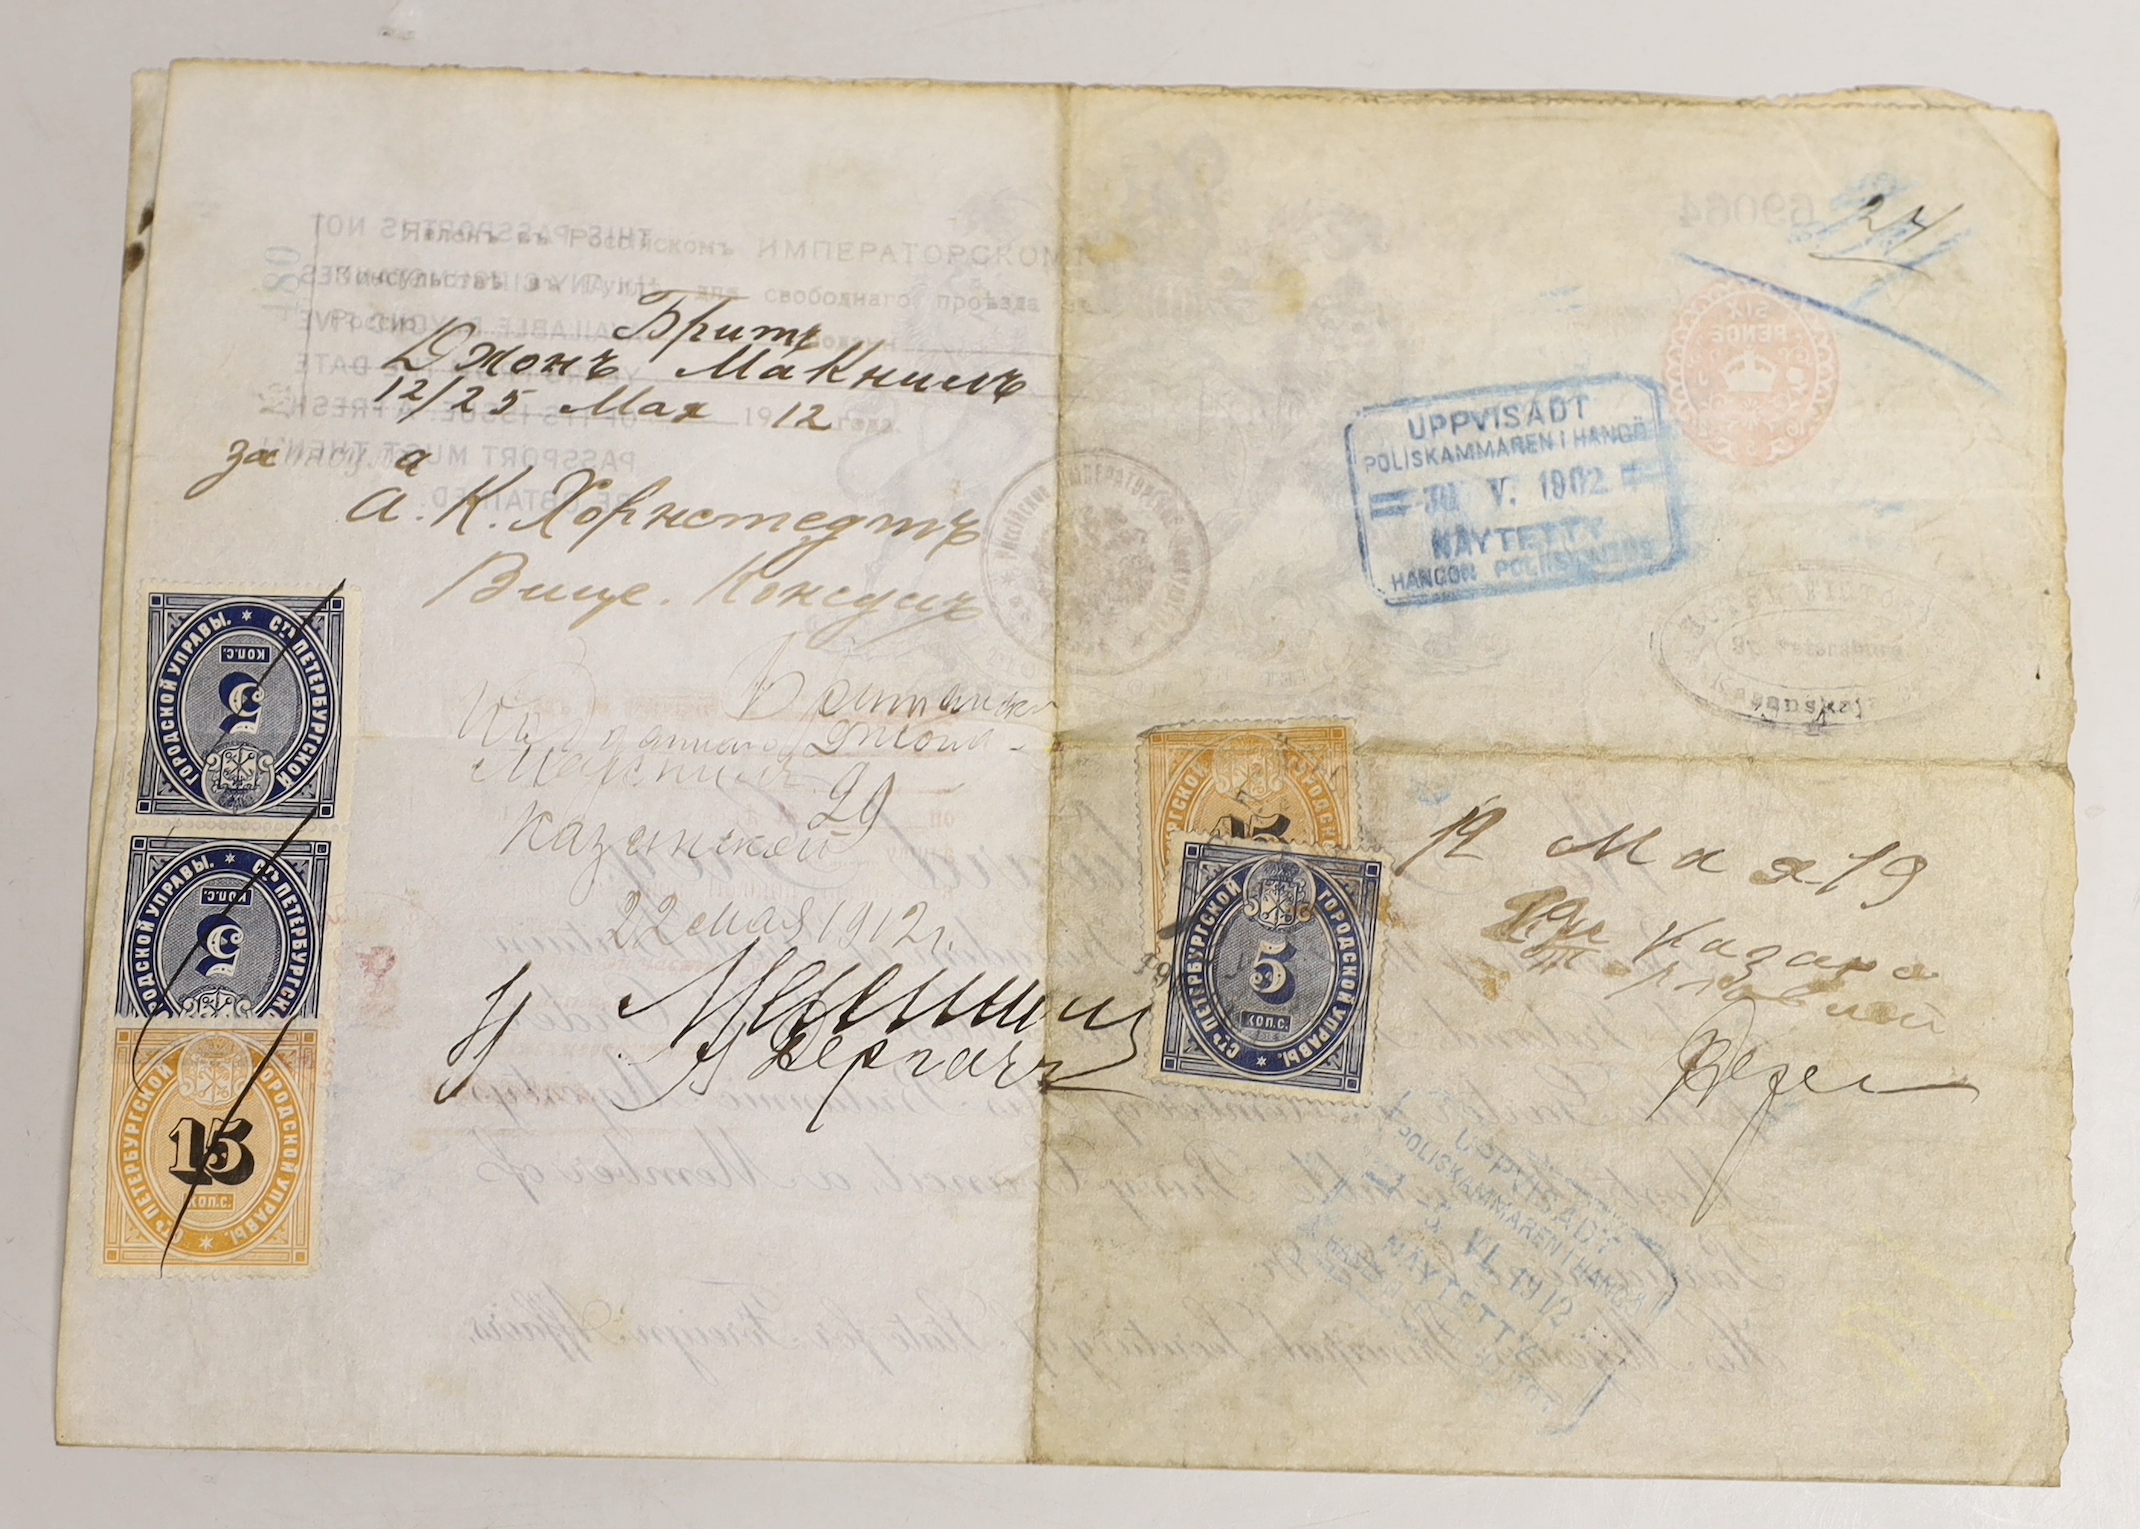 An early 20th century British passport with Russian stamps